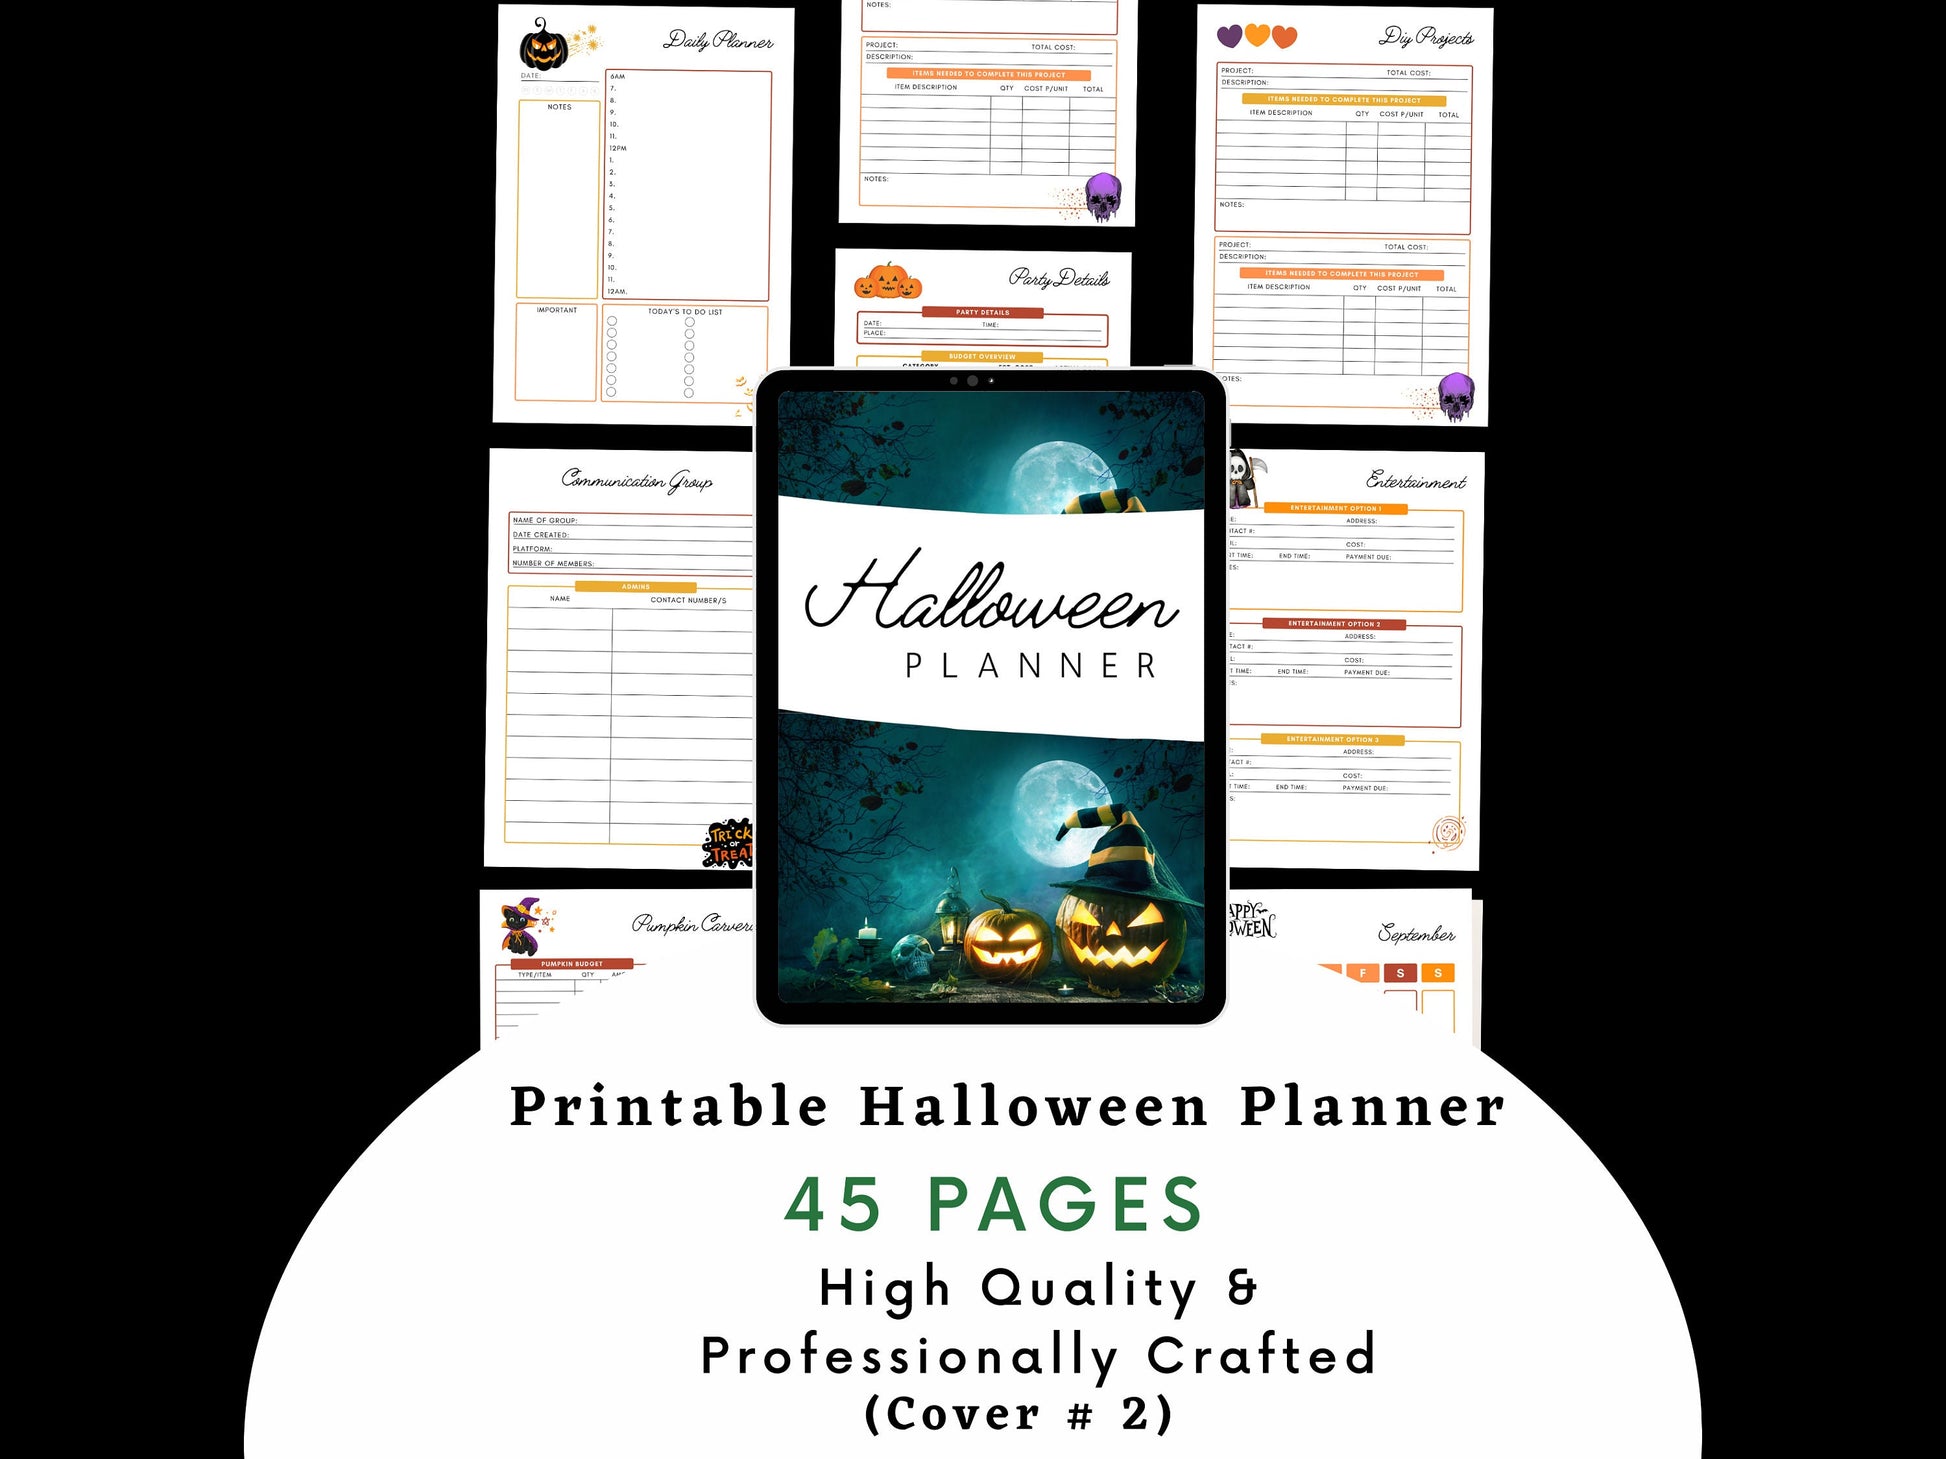 3 NEW PDF Holiday Bundle Planner, Christmas, Halloween and Thanksgiving Planner 175 pages! 100% worth it